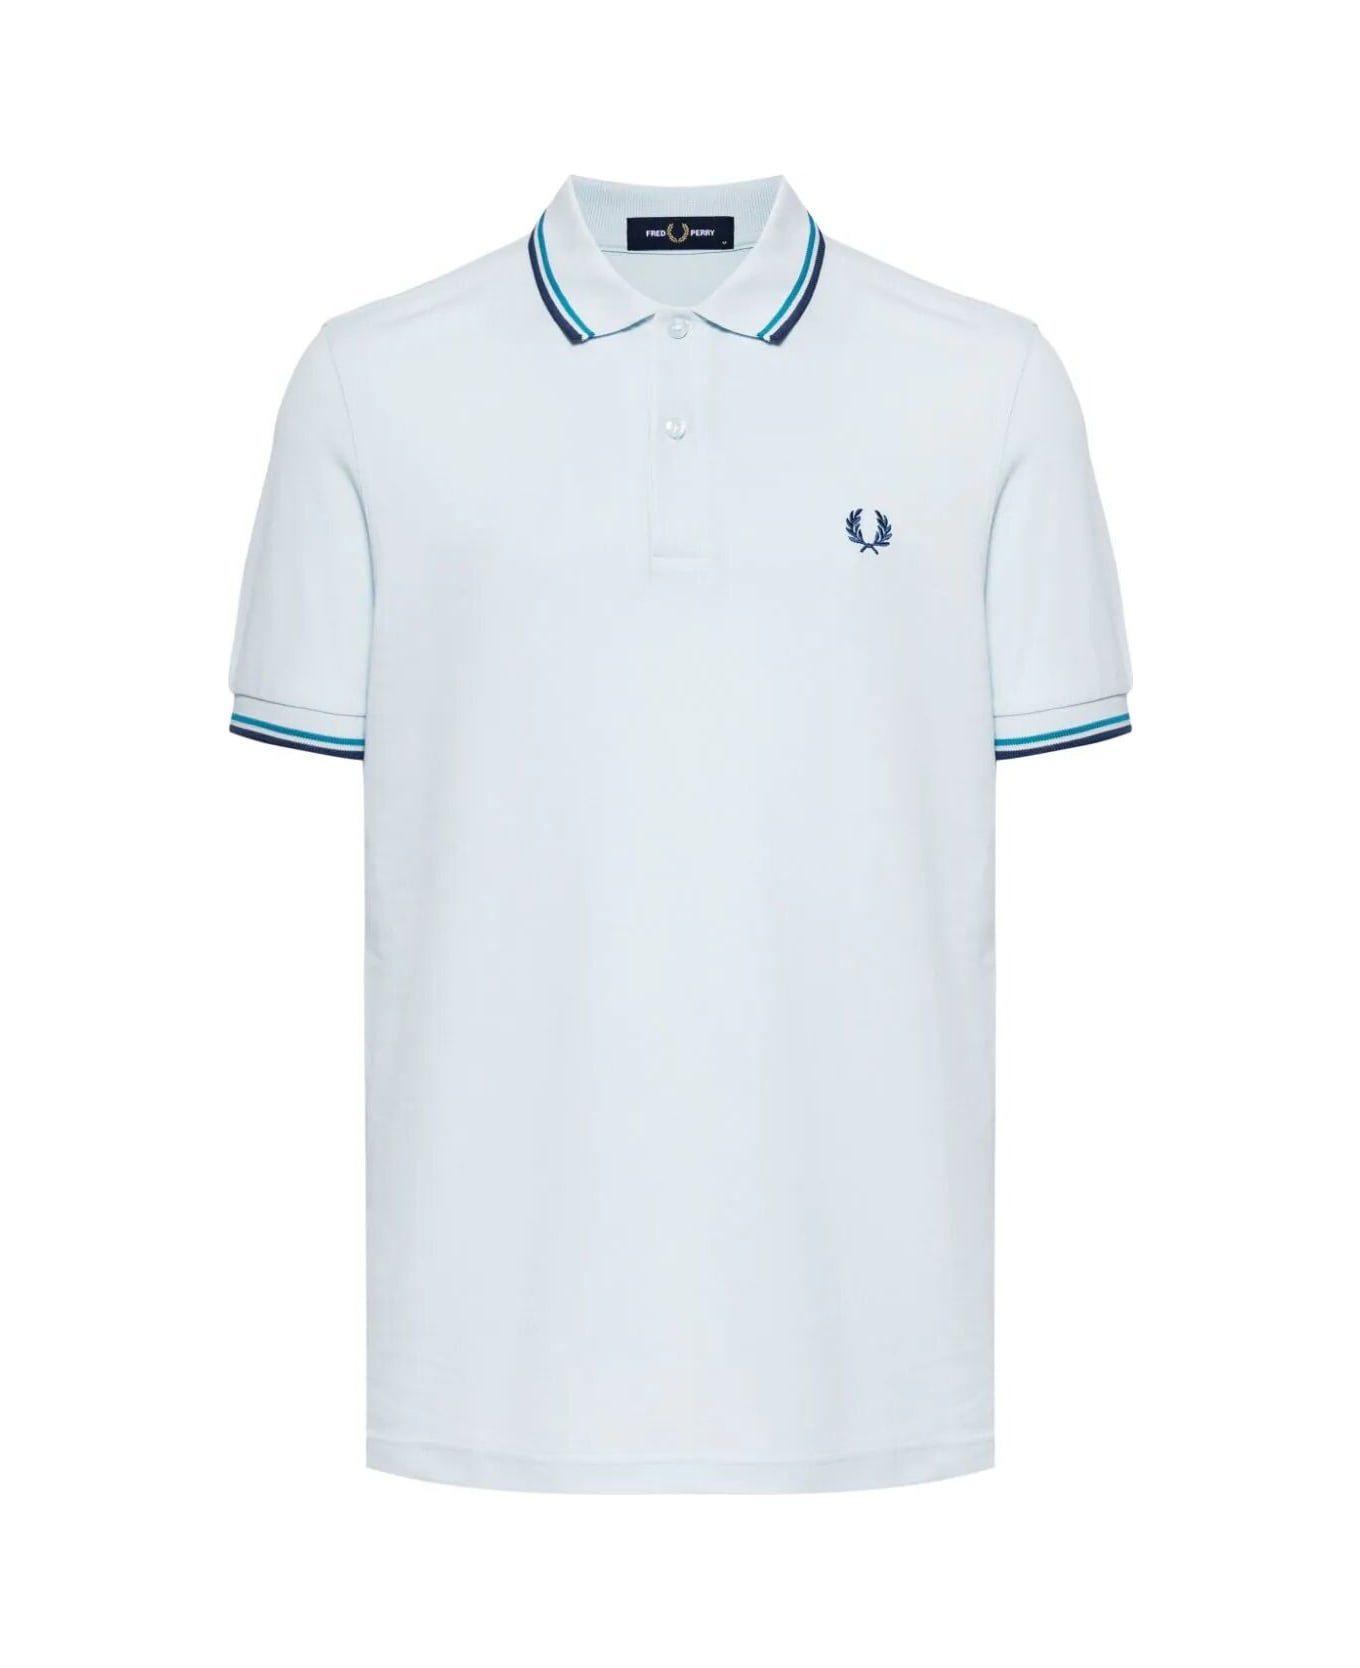 Fred Perry Fp Twin Tipped Shirt - Lice Cybl Mdngbl